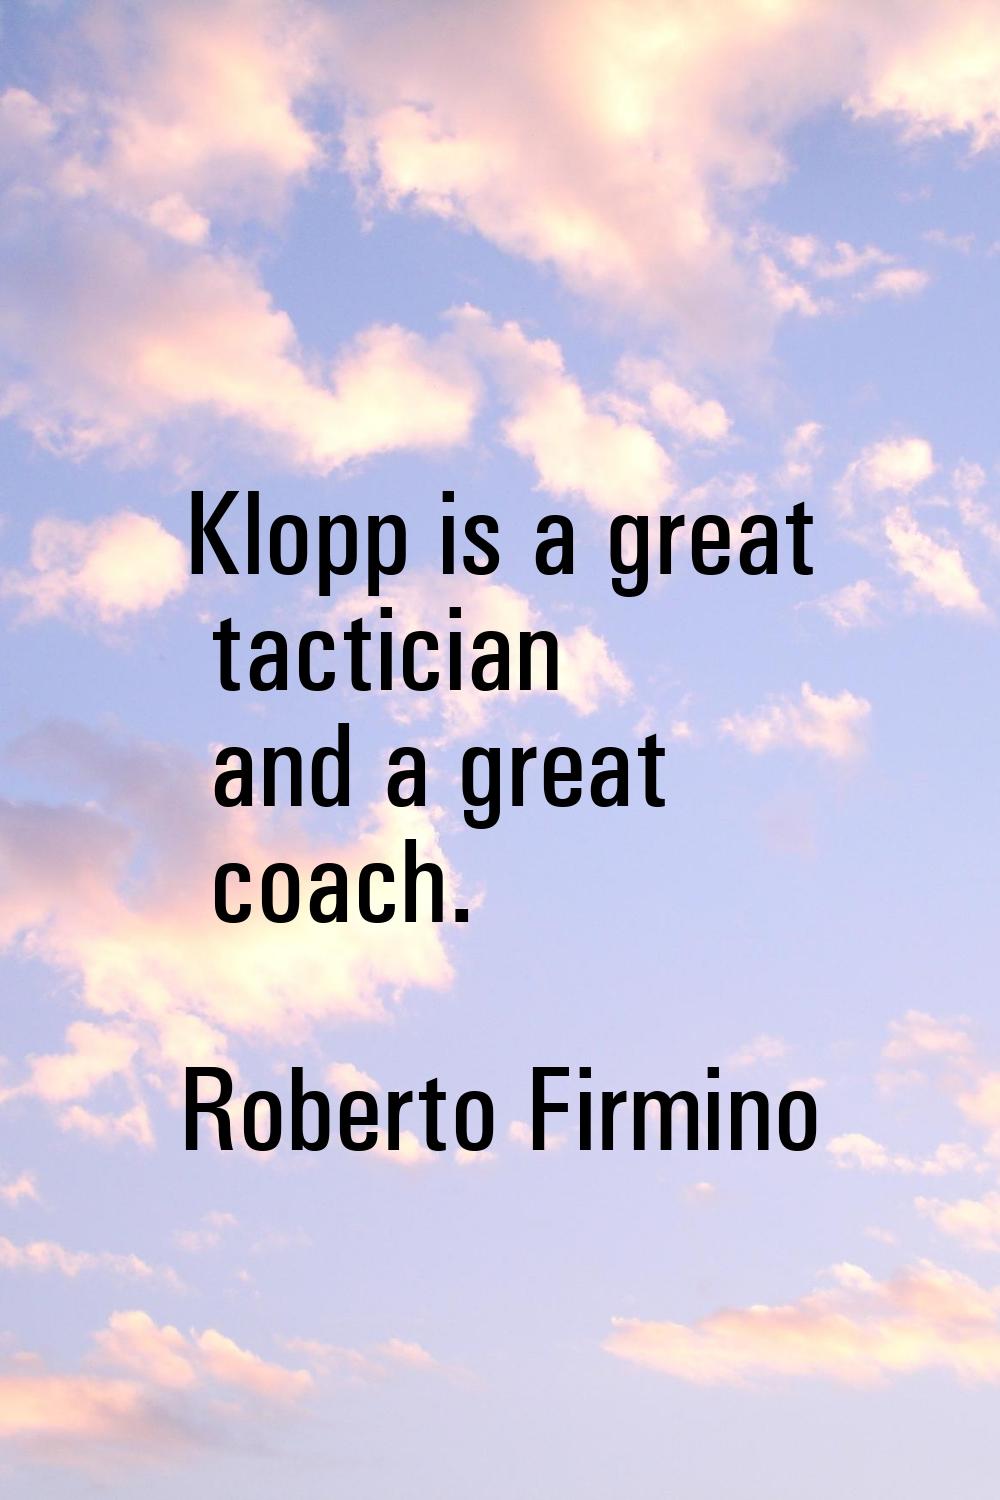 Klopp is a great tactician and a great coach.